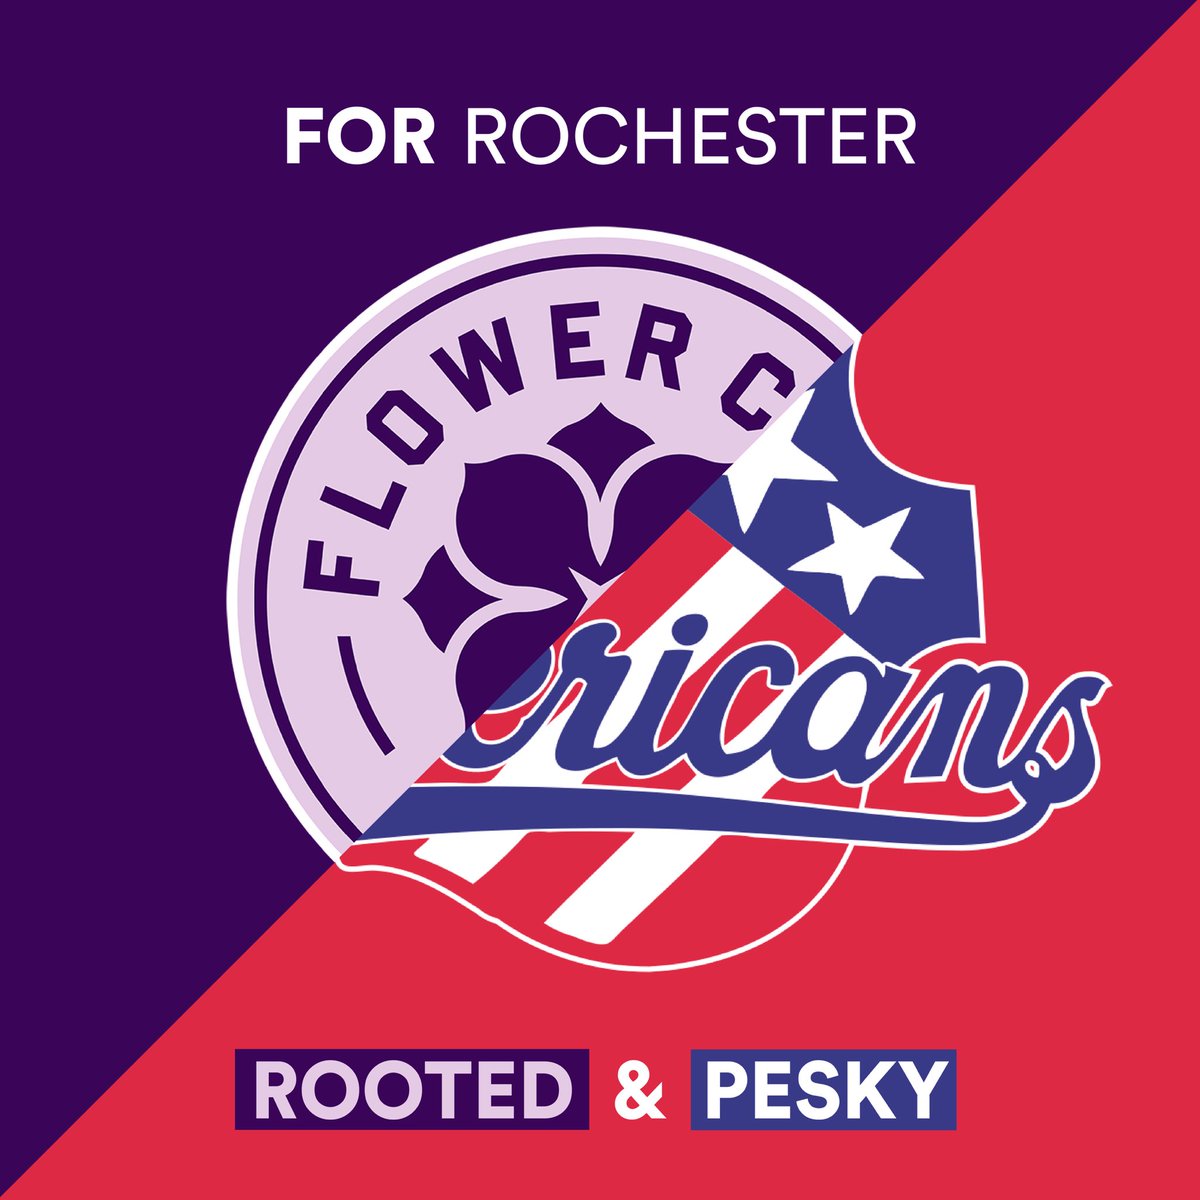 ROOTED & PESKY! • Hard to think of two better words to describe our teams or our city. 

Be sure to show your love FOR Rochester by supporting  @amerkshockey & @flowercityunion in their BIG games this weekend. #ForRoc